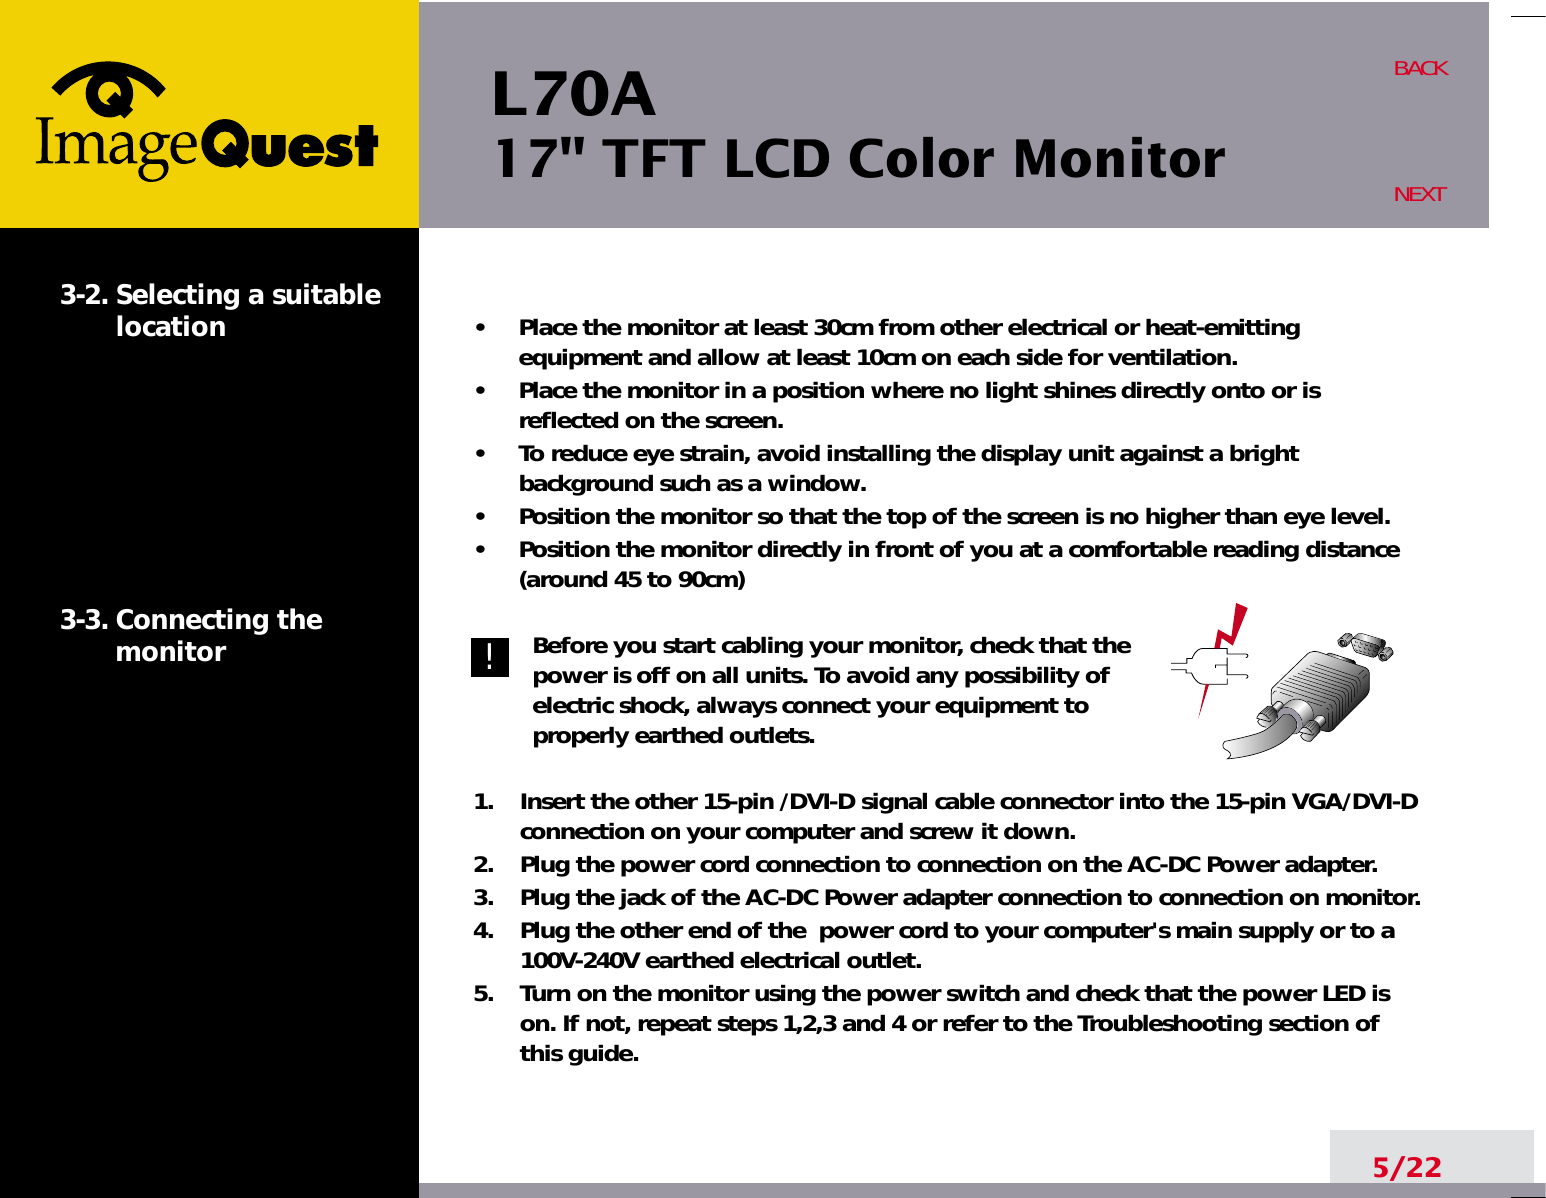 L70A17&quot; TFT LCD Color Monitor5/22BACKNEXT3-2. Selecting a suitablelocation3-3. Connecting the monitor•     Place the monitor at least 30cm from other electrical or heat-emittingequipment and allow at least 10cm on each side for ventilation.•     Place the monitor in a position where no light shines directly onto or isreflected on the screen.•     To reduce eye strain, avoid installing the display unit against a brightbackground such as a window.•     Position the monitor so that the top of the screen is no higher than eye level.•     Position the monitor directly in front of you at a comfortable reading distance(around 45 to 90cm) Before you start cabling your monitor, check that thepower is off on all units. To avoid any possibility ofelectric shock, always connect your equipment toproperly earthed outlets.1.    Insert the other 15-pin /DVI-D signal cable connector into the 15-pin VGA/DVI-Dconnection on your computer and screw it down. 2.    Plug the power cord connection to connection on the AC-DC Power adapter.3.    Plug the jack of the AC-DC Power adapter connection to connection on monitor.4.    Plug the other end of the  power cord to your computer&apos;s main supply or to a100V-240V earthed electrical outlet.5.    Turn on the monitor using the power switch and check that the power LED ison. If not, repeat steps 1,2,3 and 4 or refer to the Troubleshooting section ofthis guide.!!